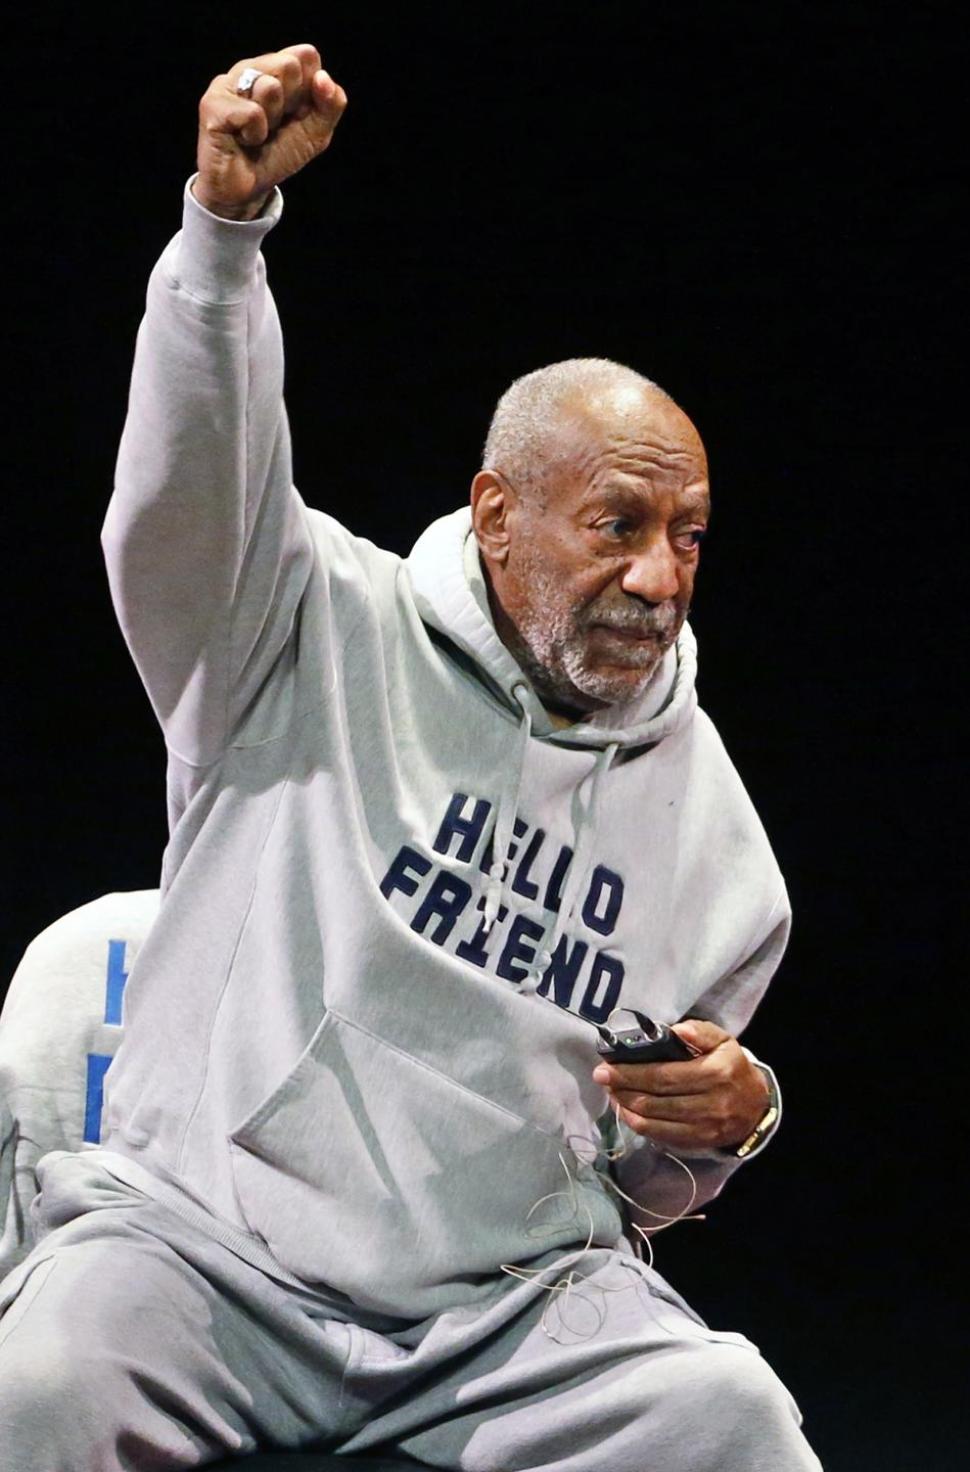 Comedian Bill Cosby performed in Denver Saturday and was greeted by some 100 protestors.